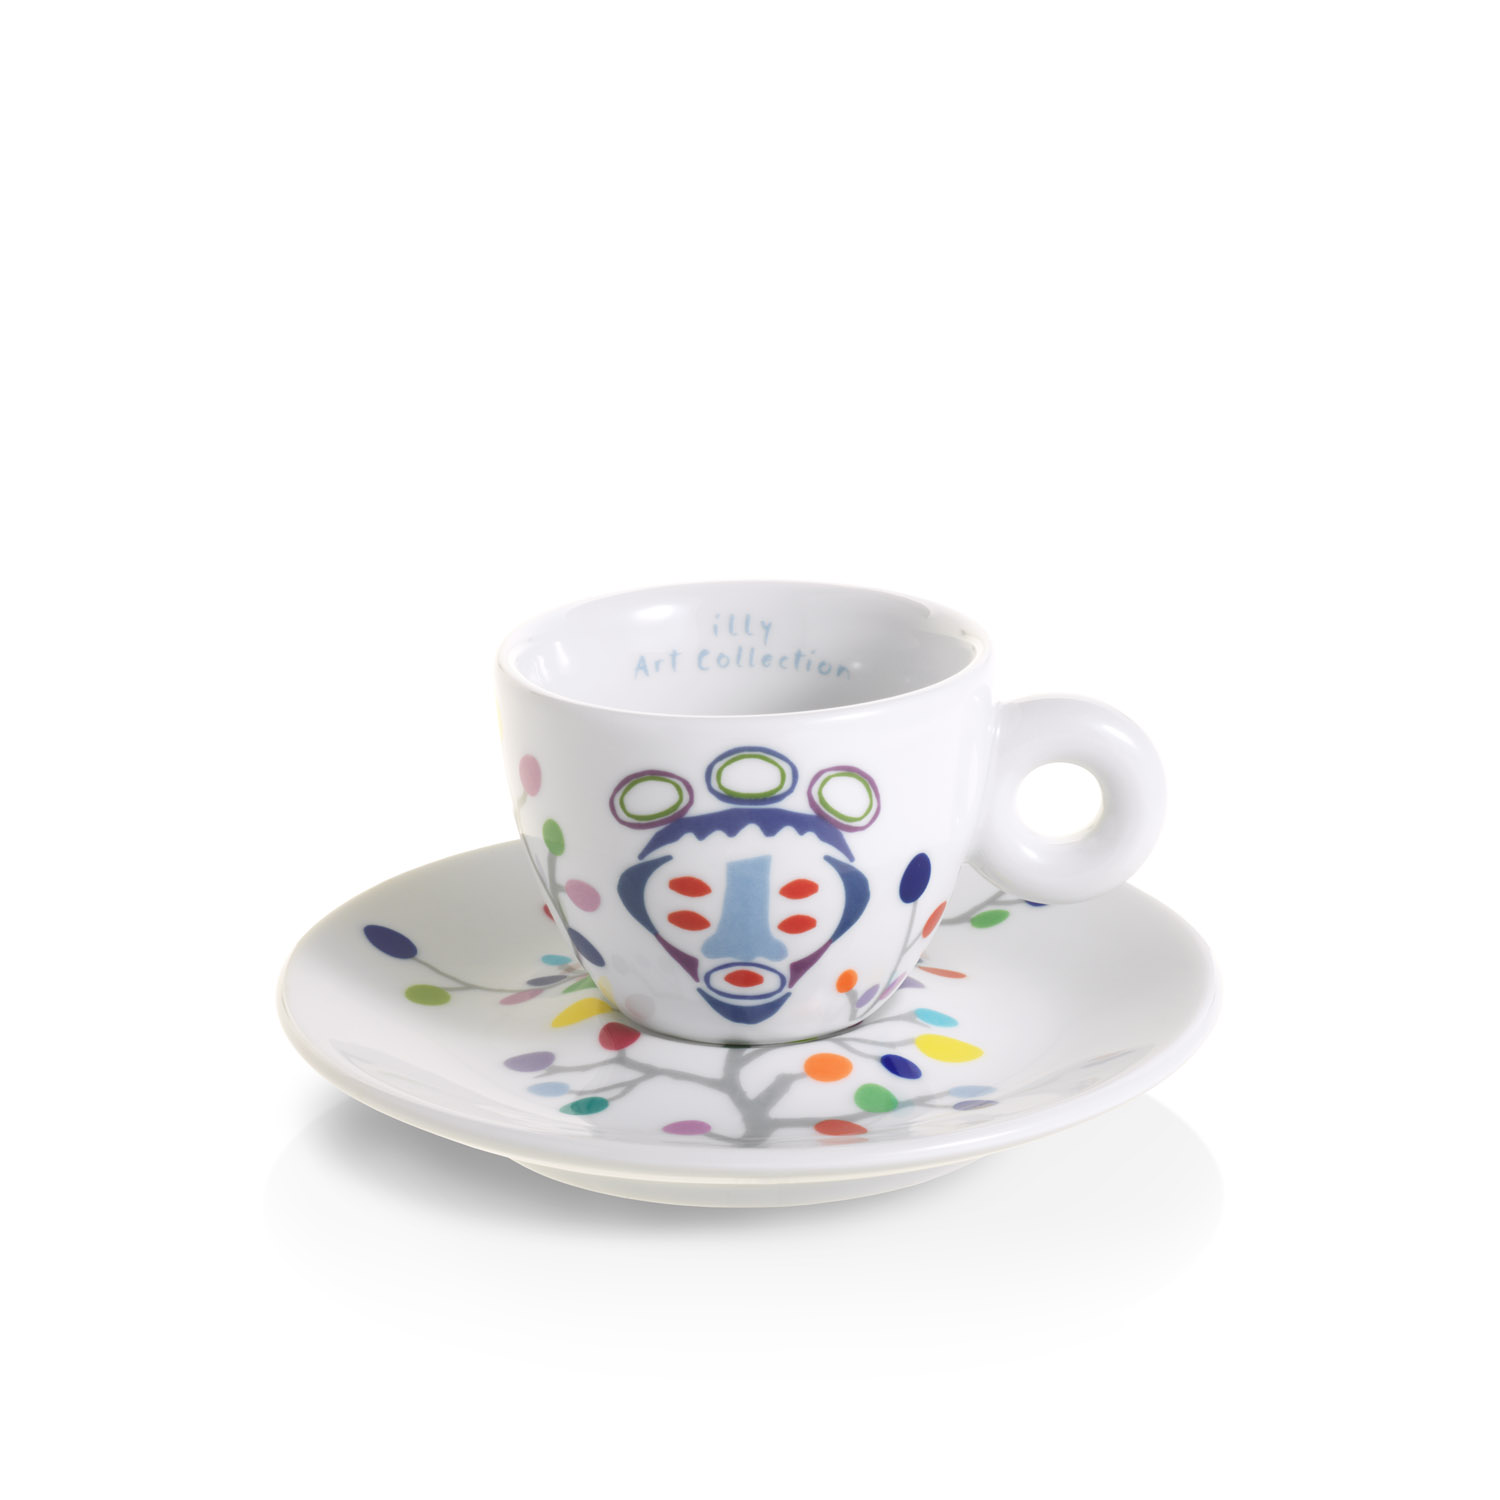 illy Art Collection PASCALE MARTHINE TAYOU Gift Set 6 Espresso Cups, Cups, 02-02-6090